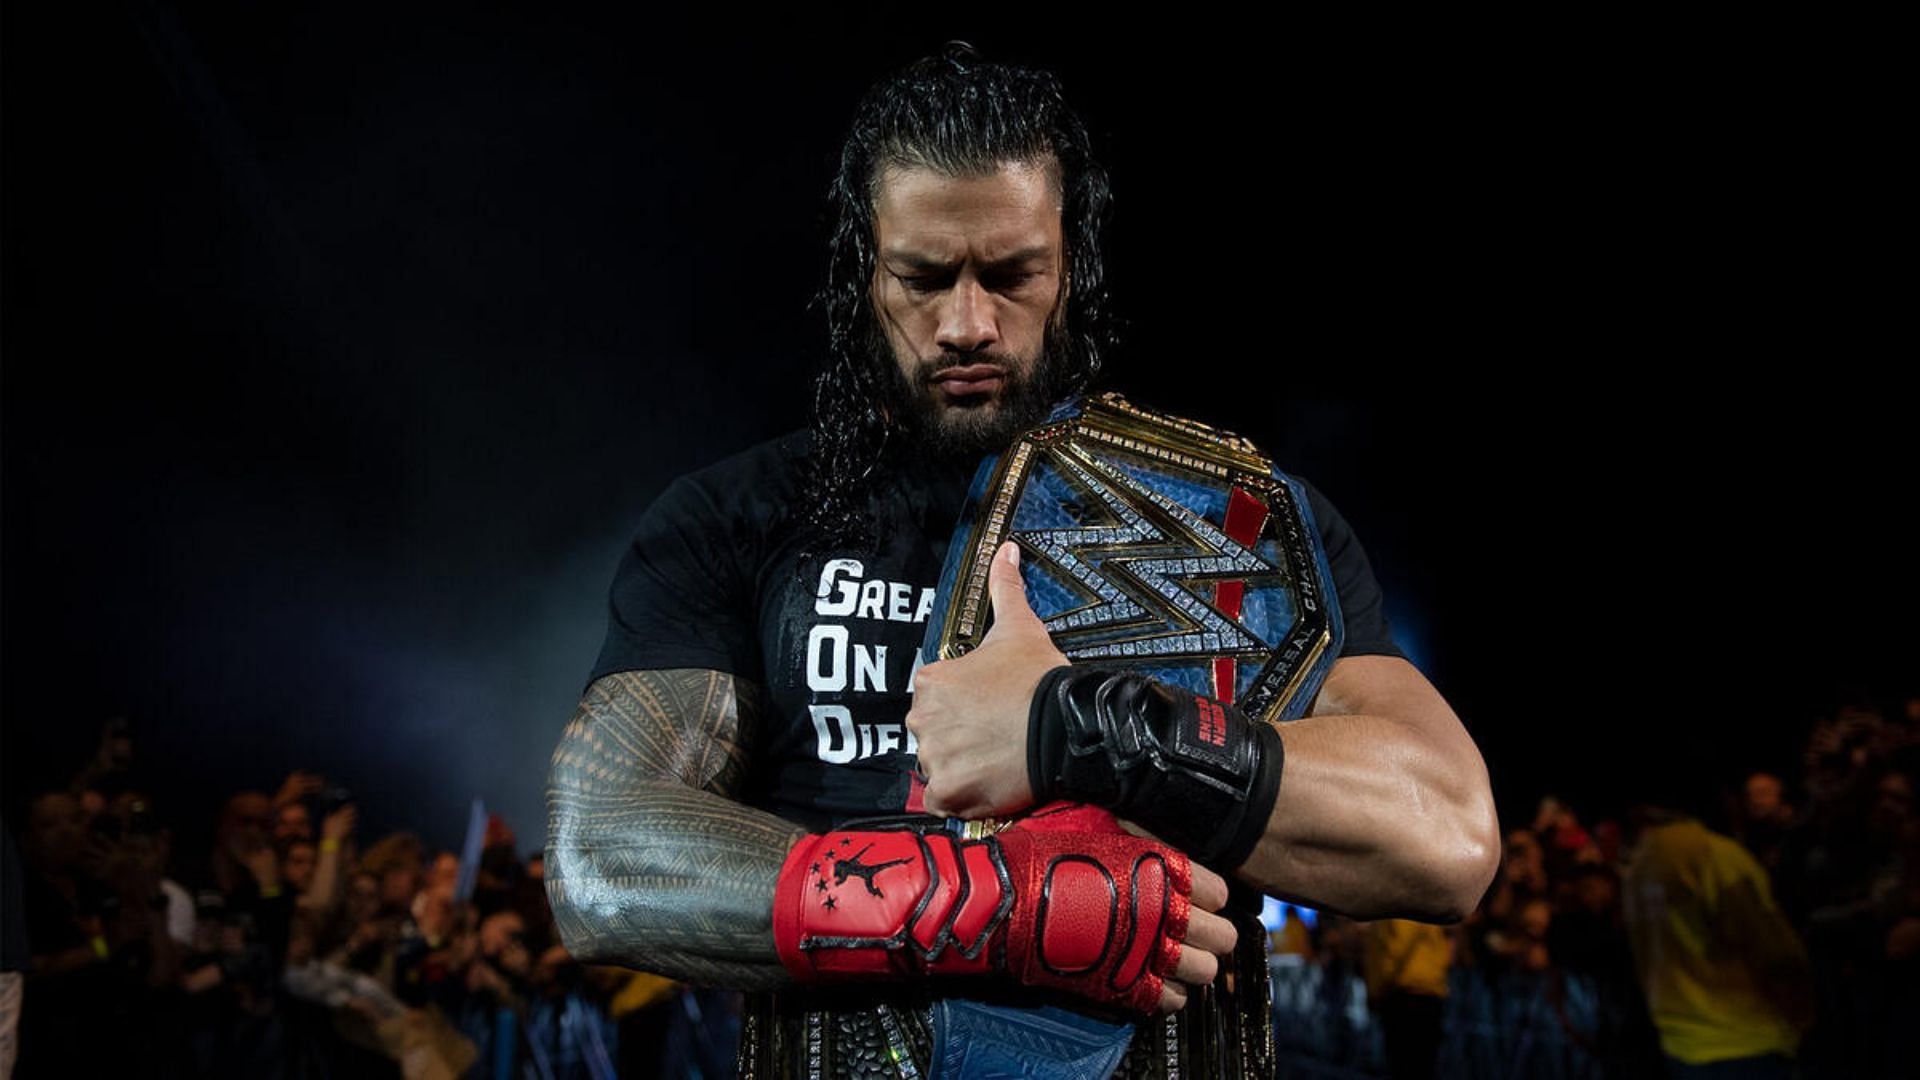 Roman Reigns is the Undisputed Universal Champion